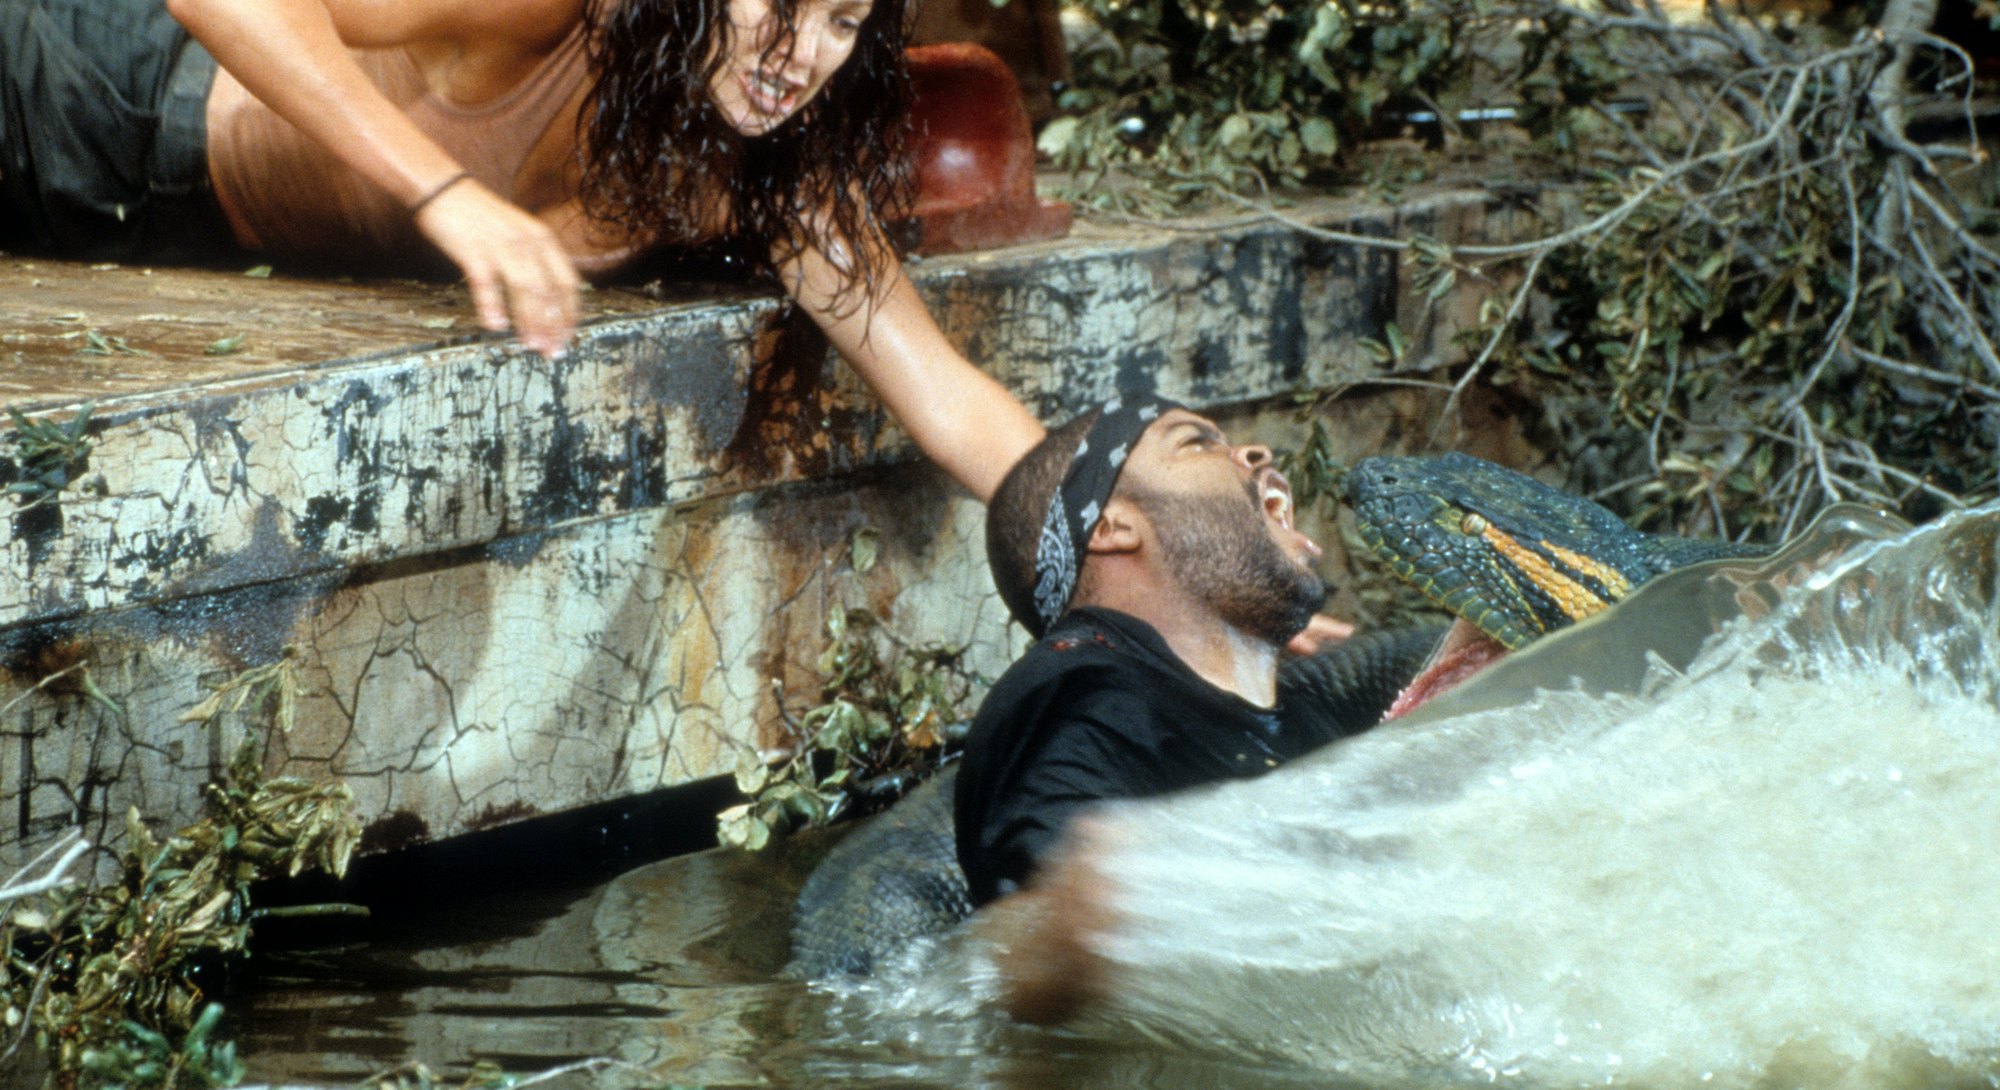 Jennifer Lopez reaching for Ice Cube as he's attacked in scene from the film 'Anaconda', 1997. (Phot...